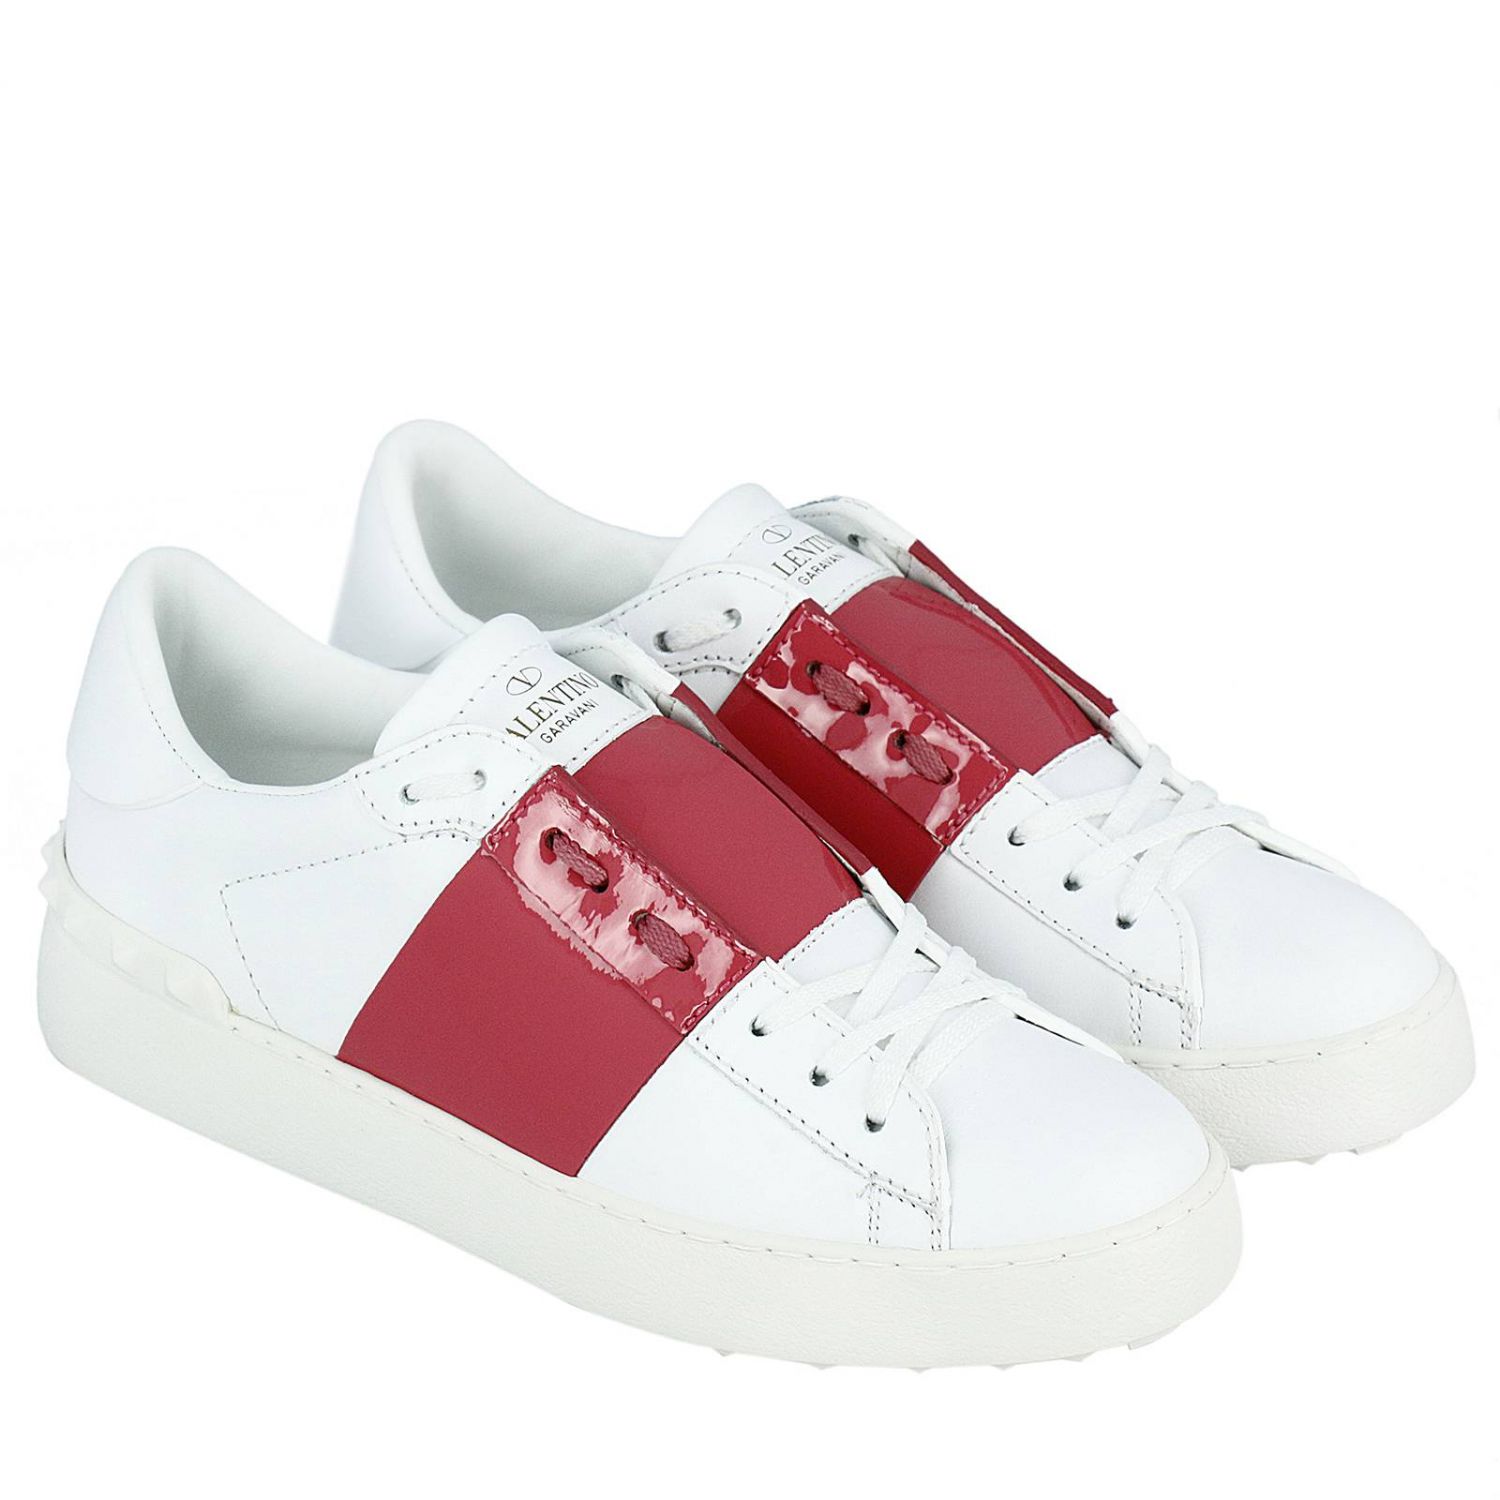 VALENTINO GARAVANI: Valentino Open sneakers in smooth leather with